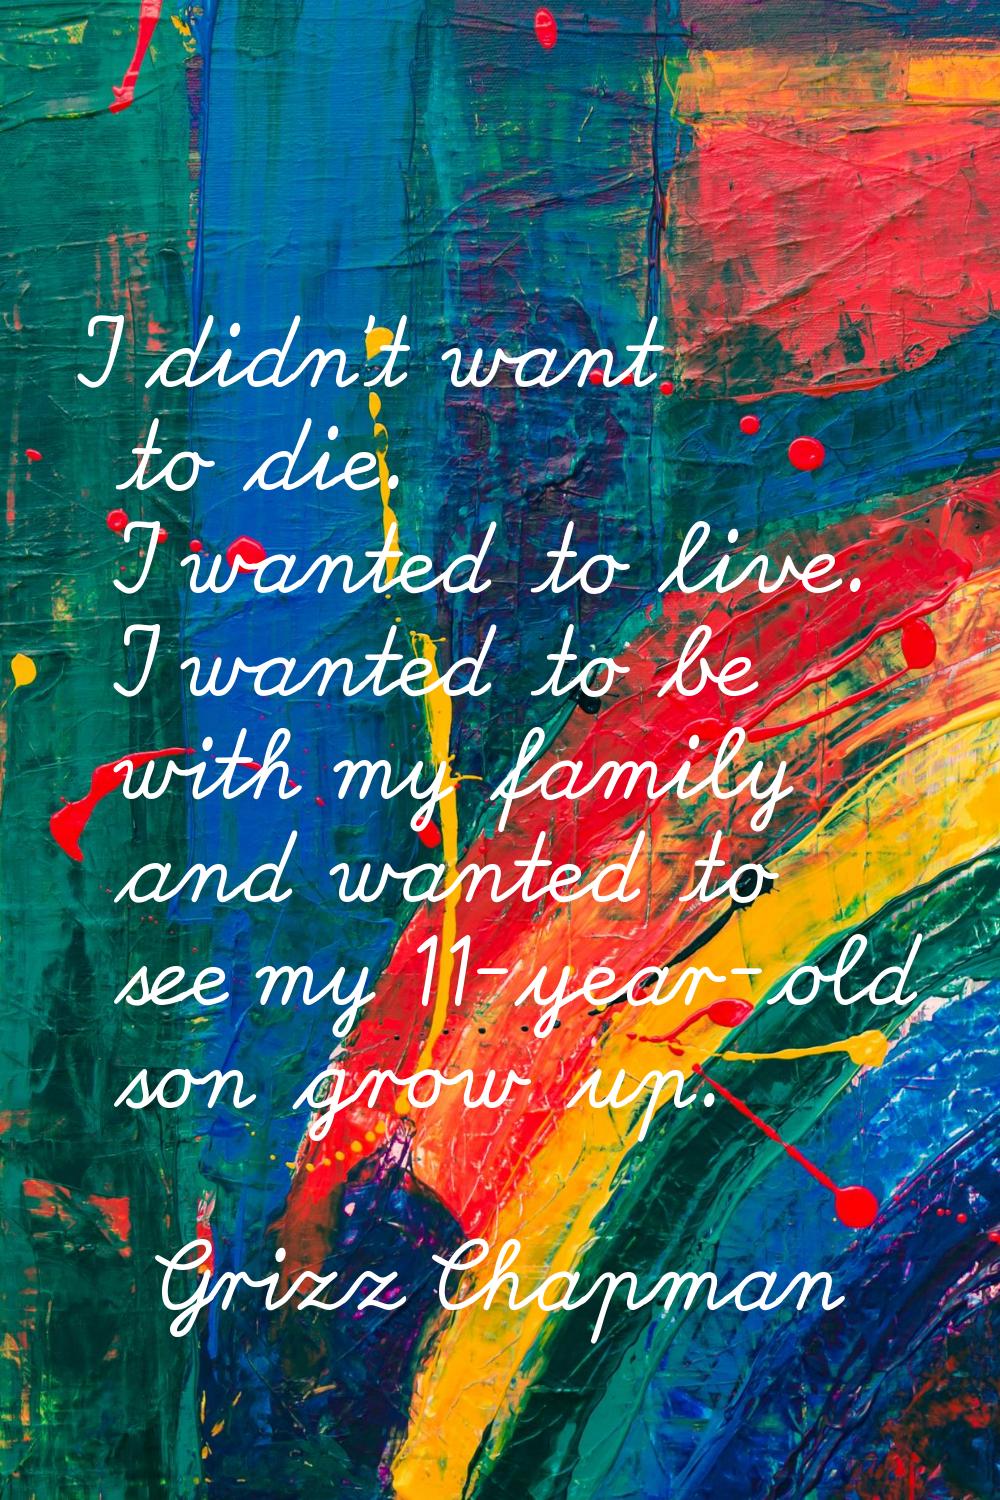 I didn't want to die. I wanted to live. I wanted to be with my family and wanted to see my 11-year-